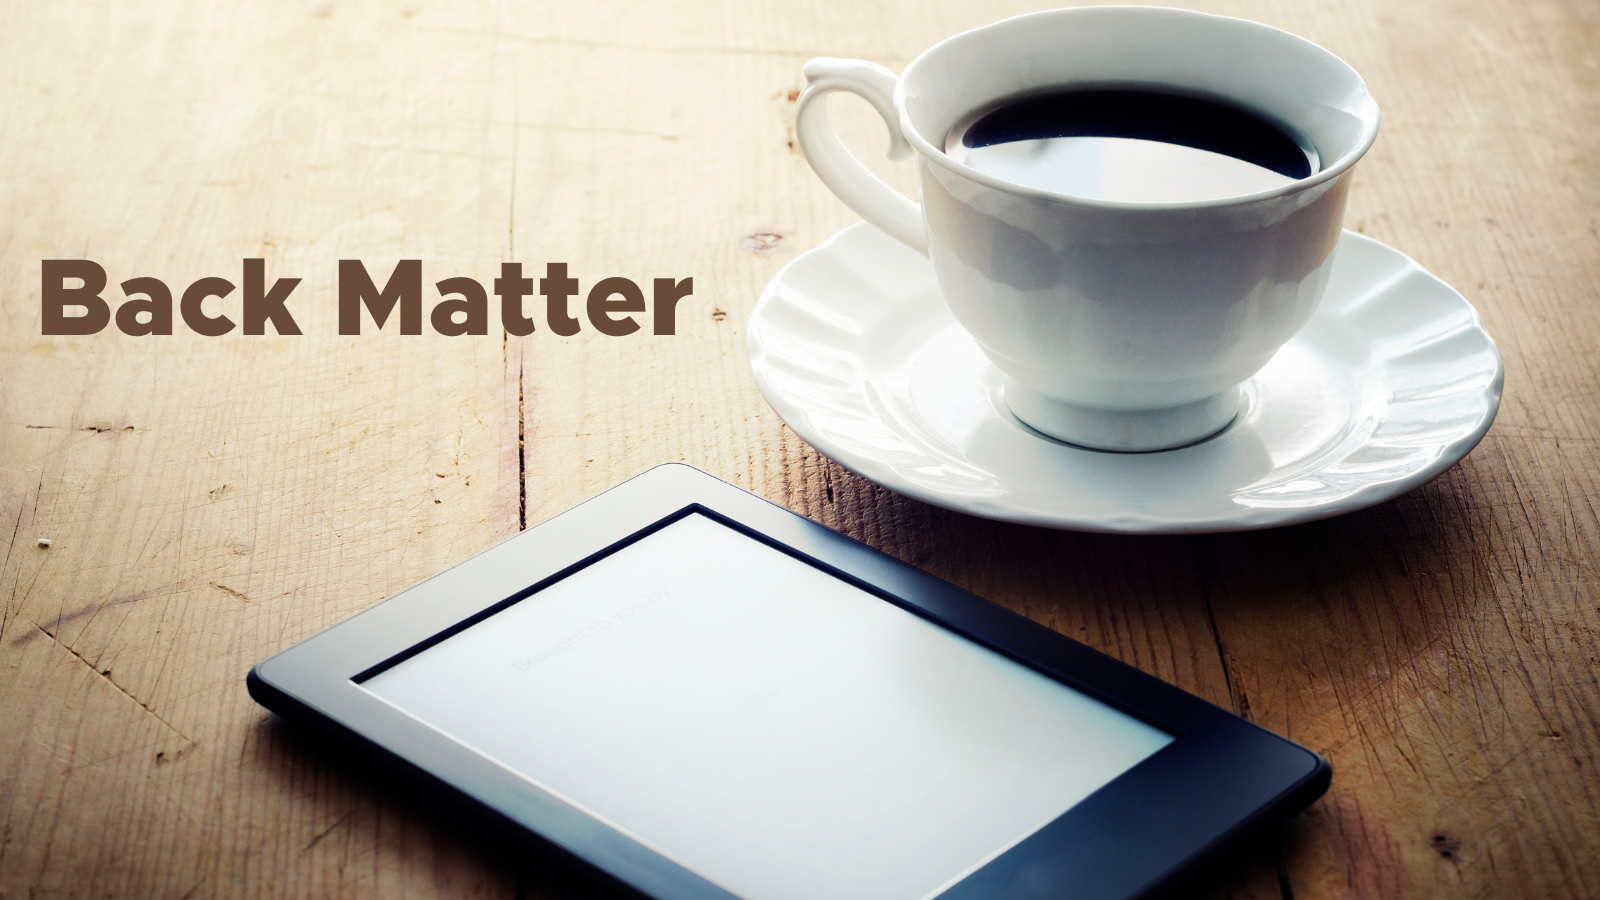 10 Tips to Optimize the Back Matter in Your Ebooks